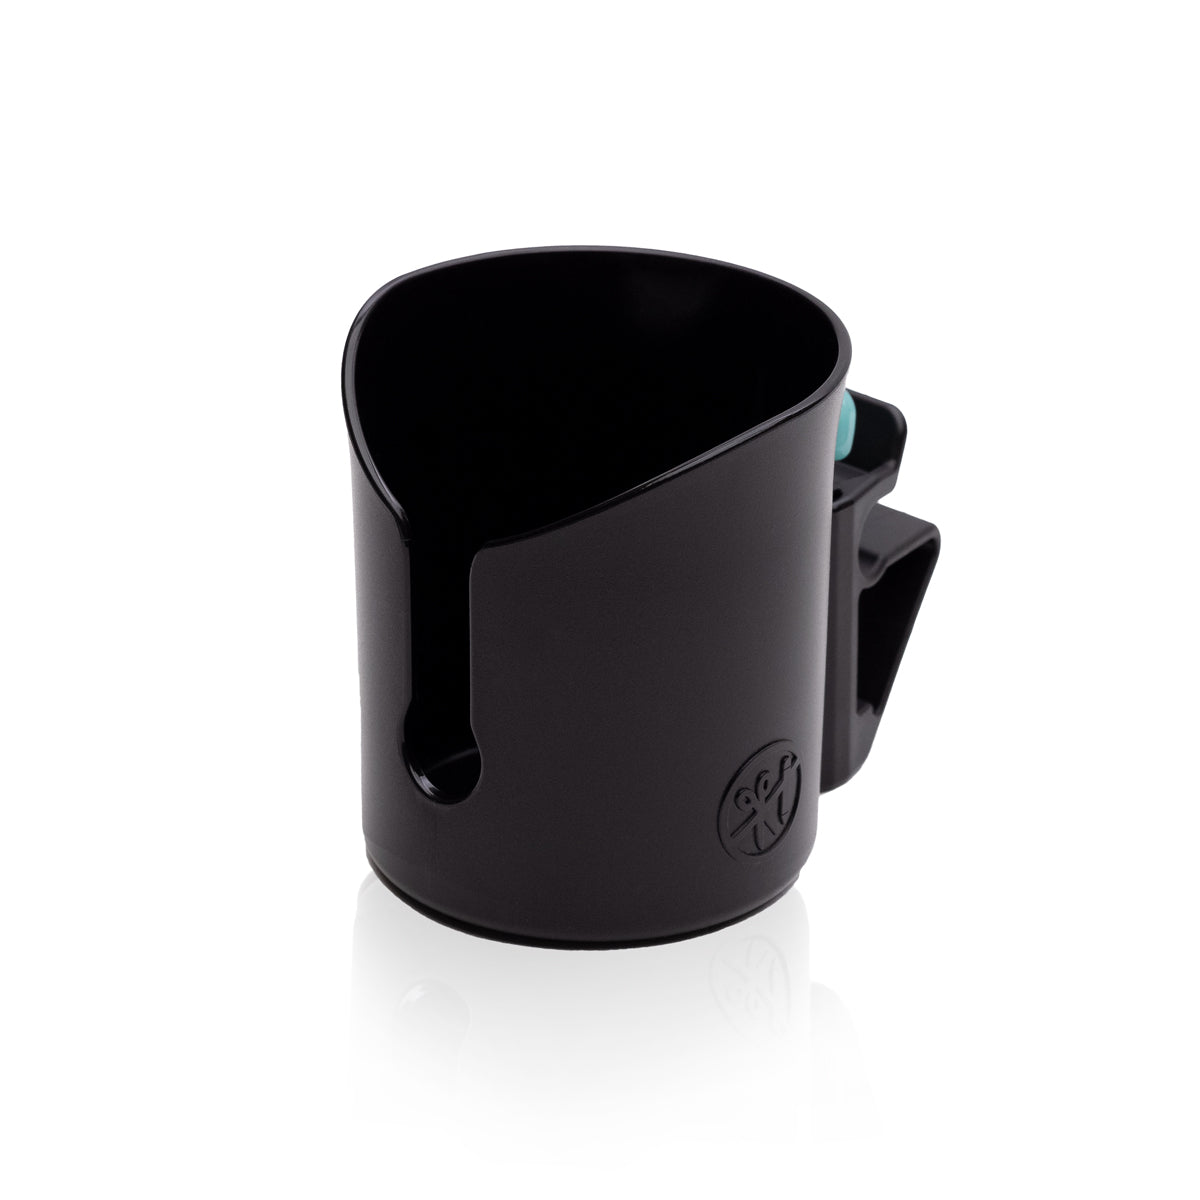 Pico™ Cup Holder